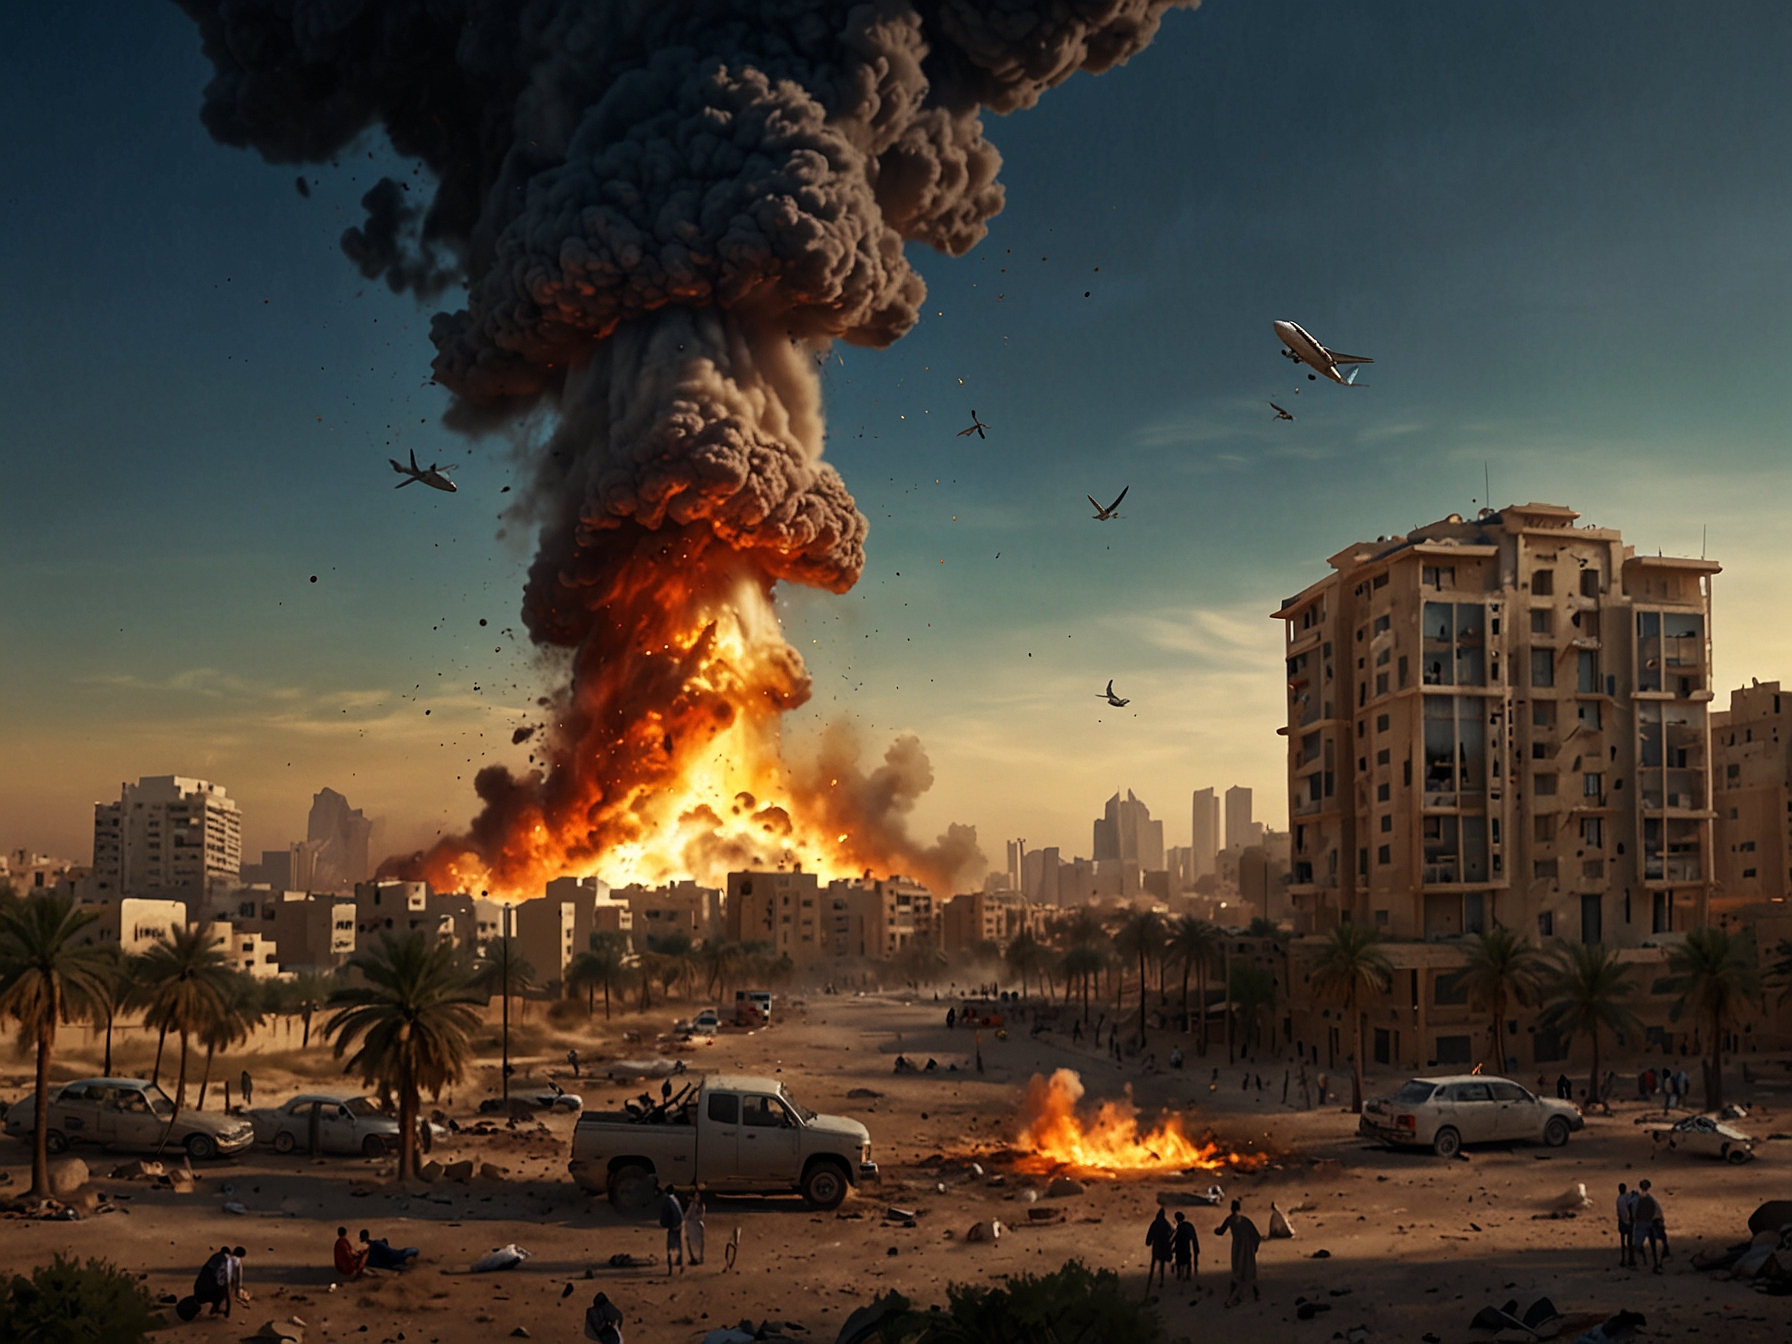 An image showing the explosion in Salam City, Egypt from 2020 that is falsely claimed to be a recent incident. This highlights the spread of misleading information on social media.